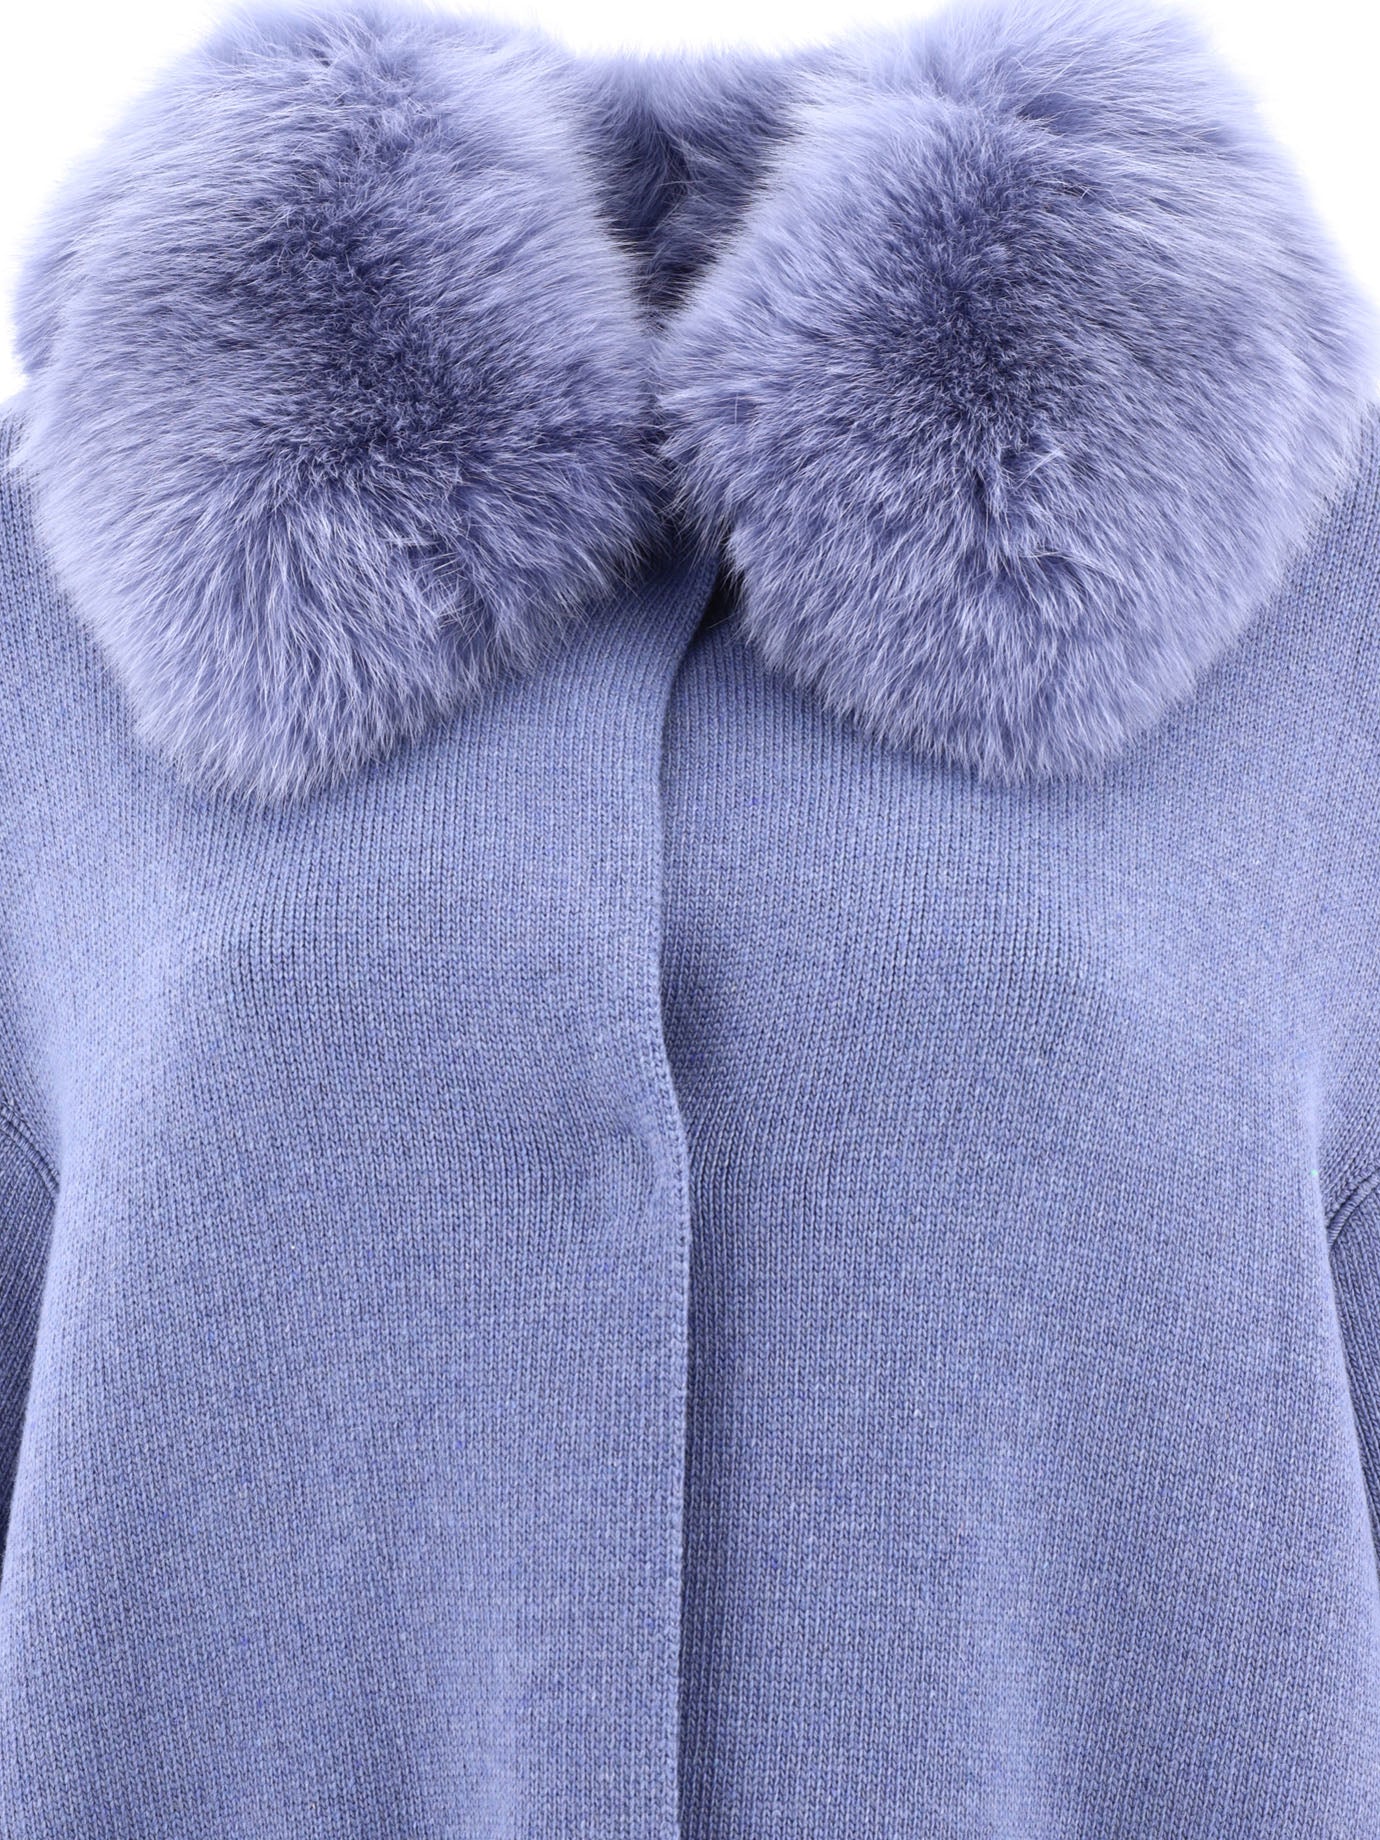 Shop Giovi Luxurious Wool And Cashmere Jacket In Light Blue For Women